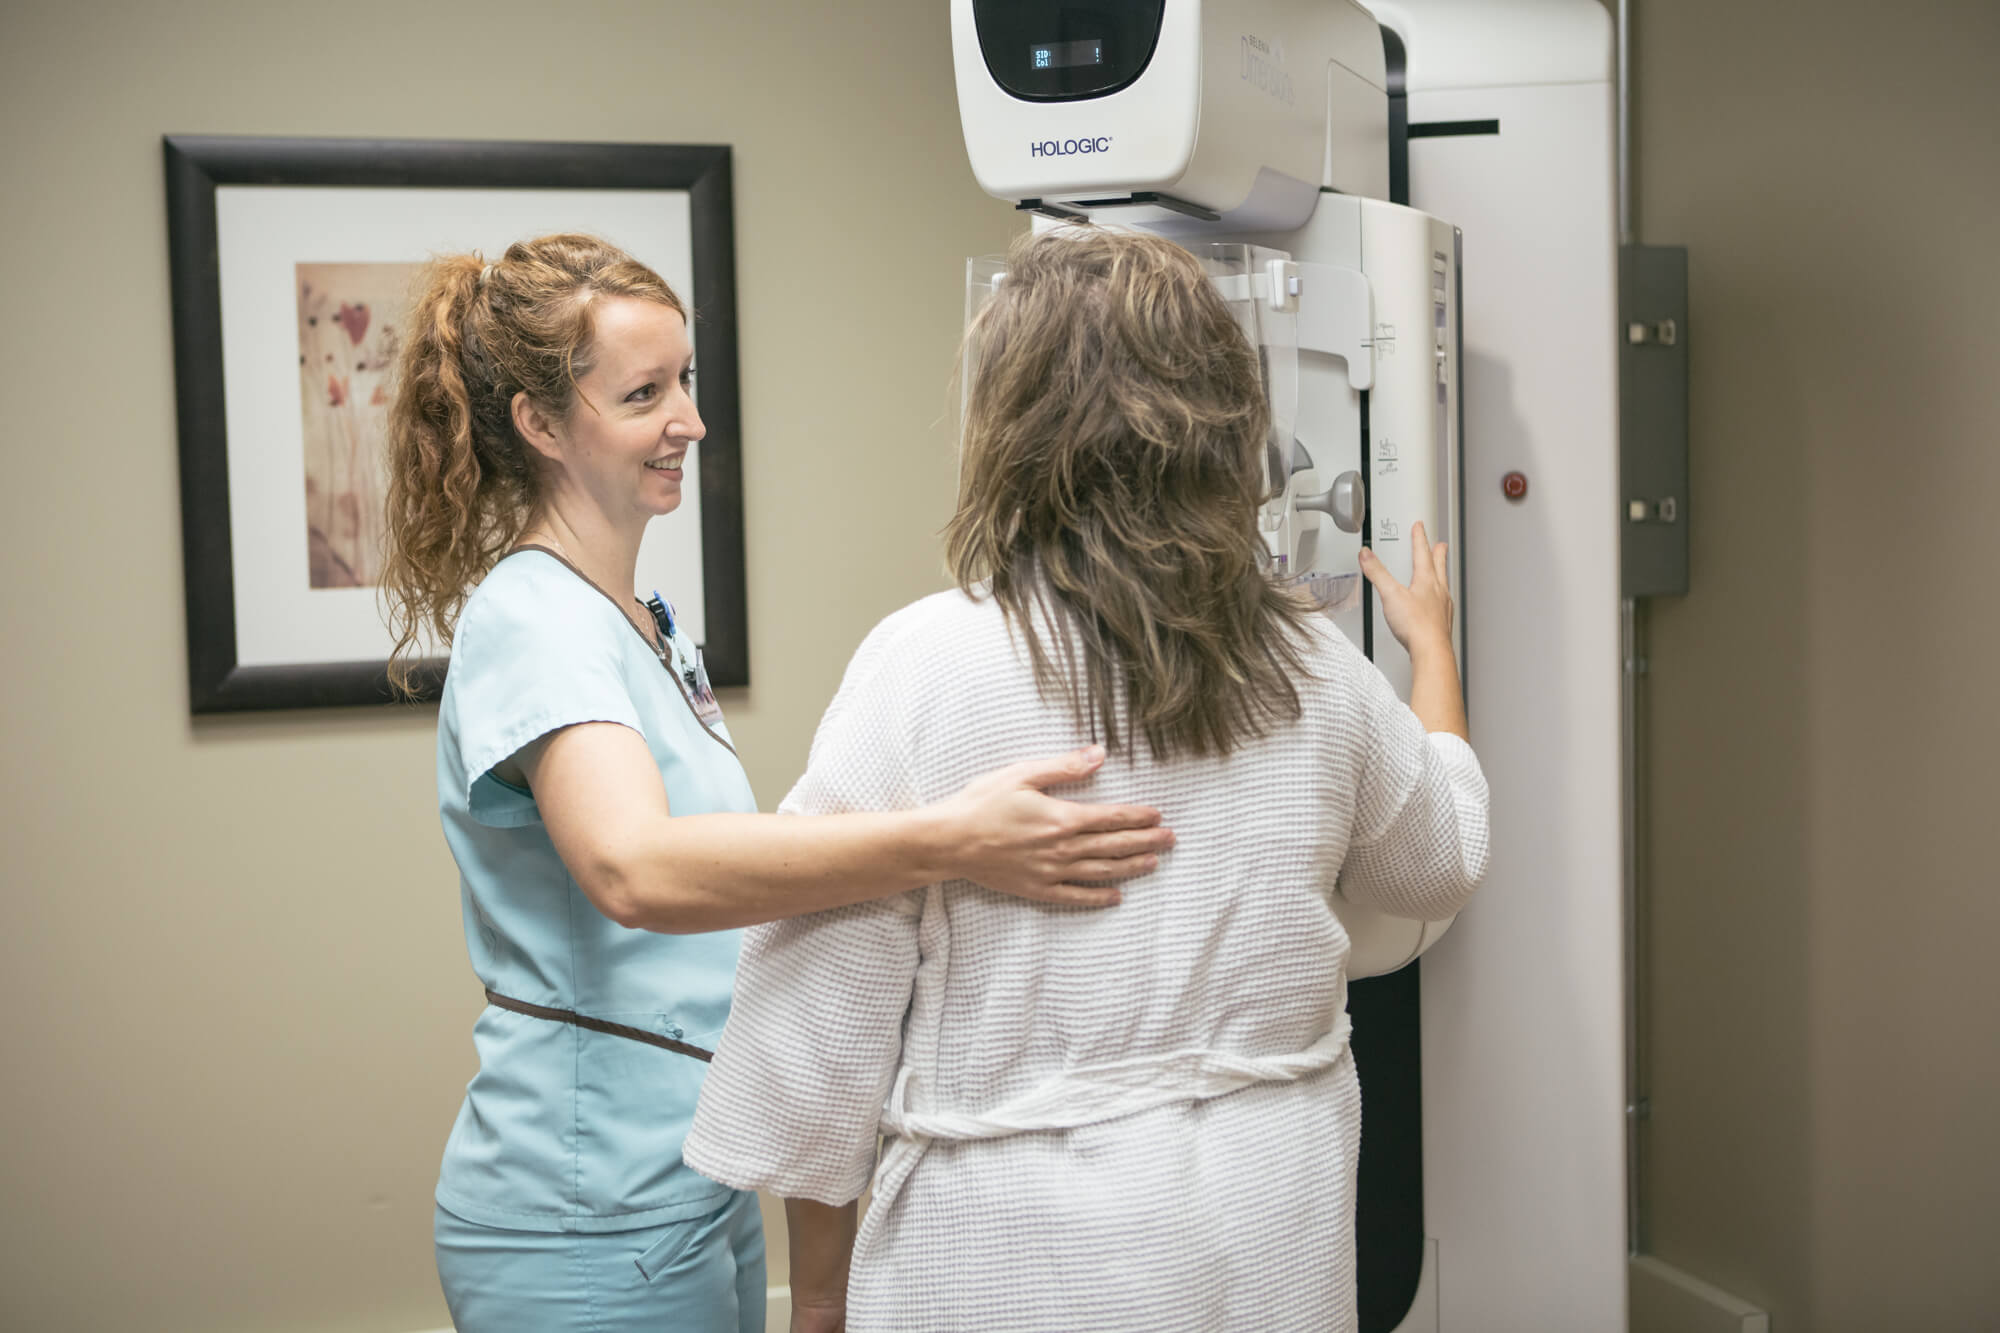 3D mammography, or Tomosynthesis, is the newest technology for detecting small breast masses and distortions. Additionally, it is a great tool for patients identified as having dense breast tissue.